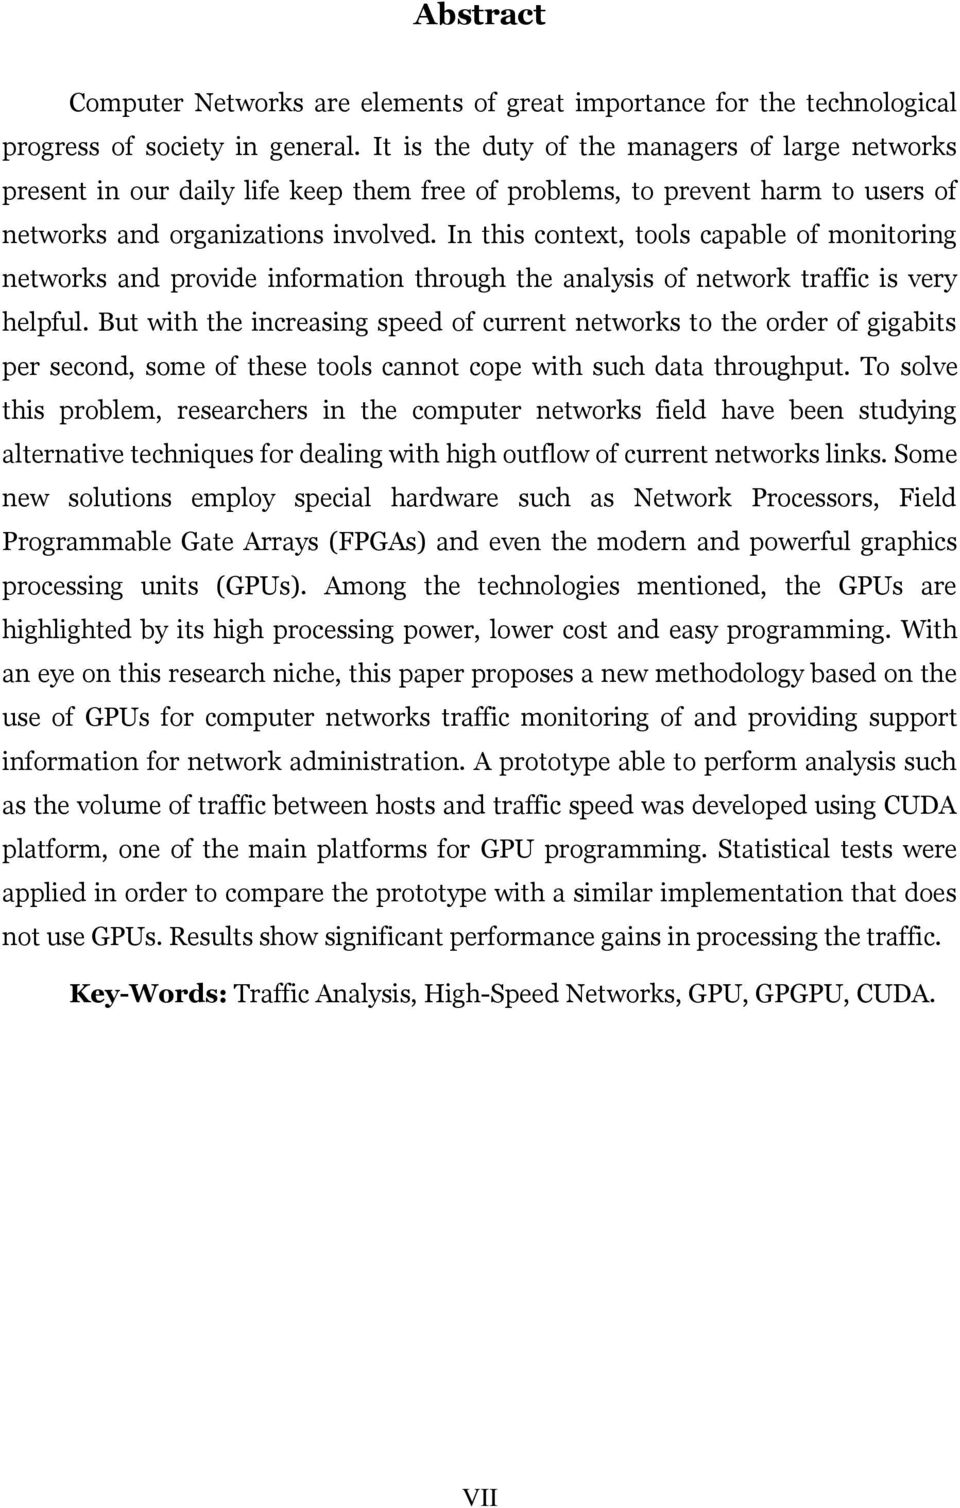 In this context, tools capable of monitoring networks and provide information through the analysis of network traffic is very helpful.